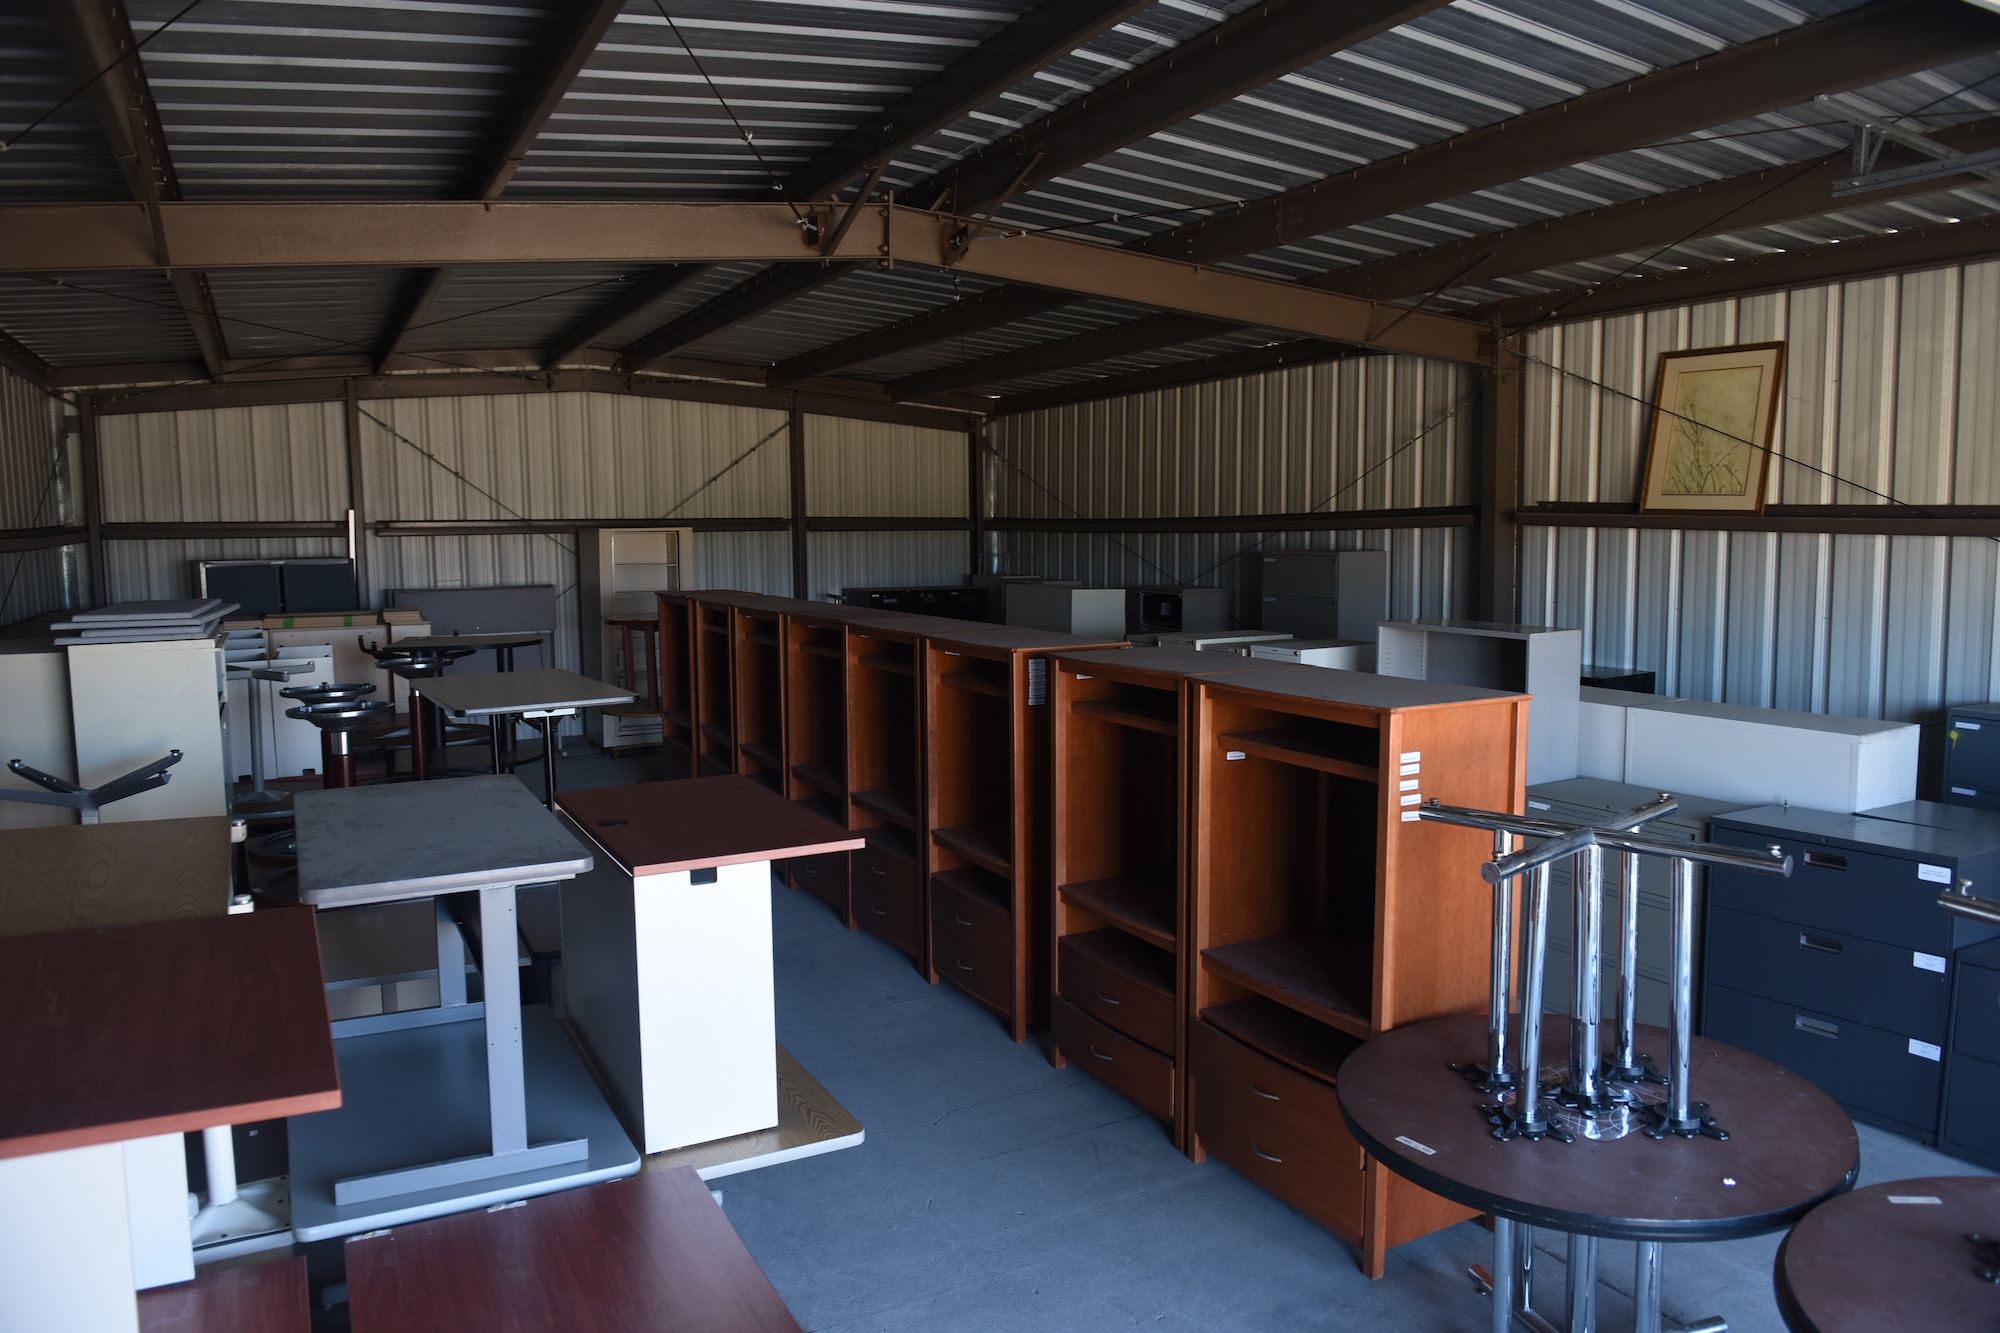 The Vandenberg Recycling Center manages a re-use program for used government furniture and office goods. Utilizing the re-use inventory helps the base save money through disposal and replacement cost avoidance of these items. (U.S. Air Force photo by Michael Peterson)